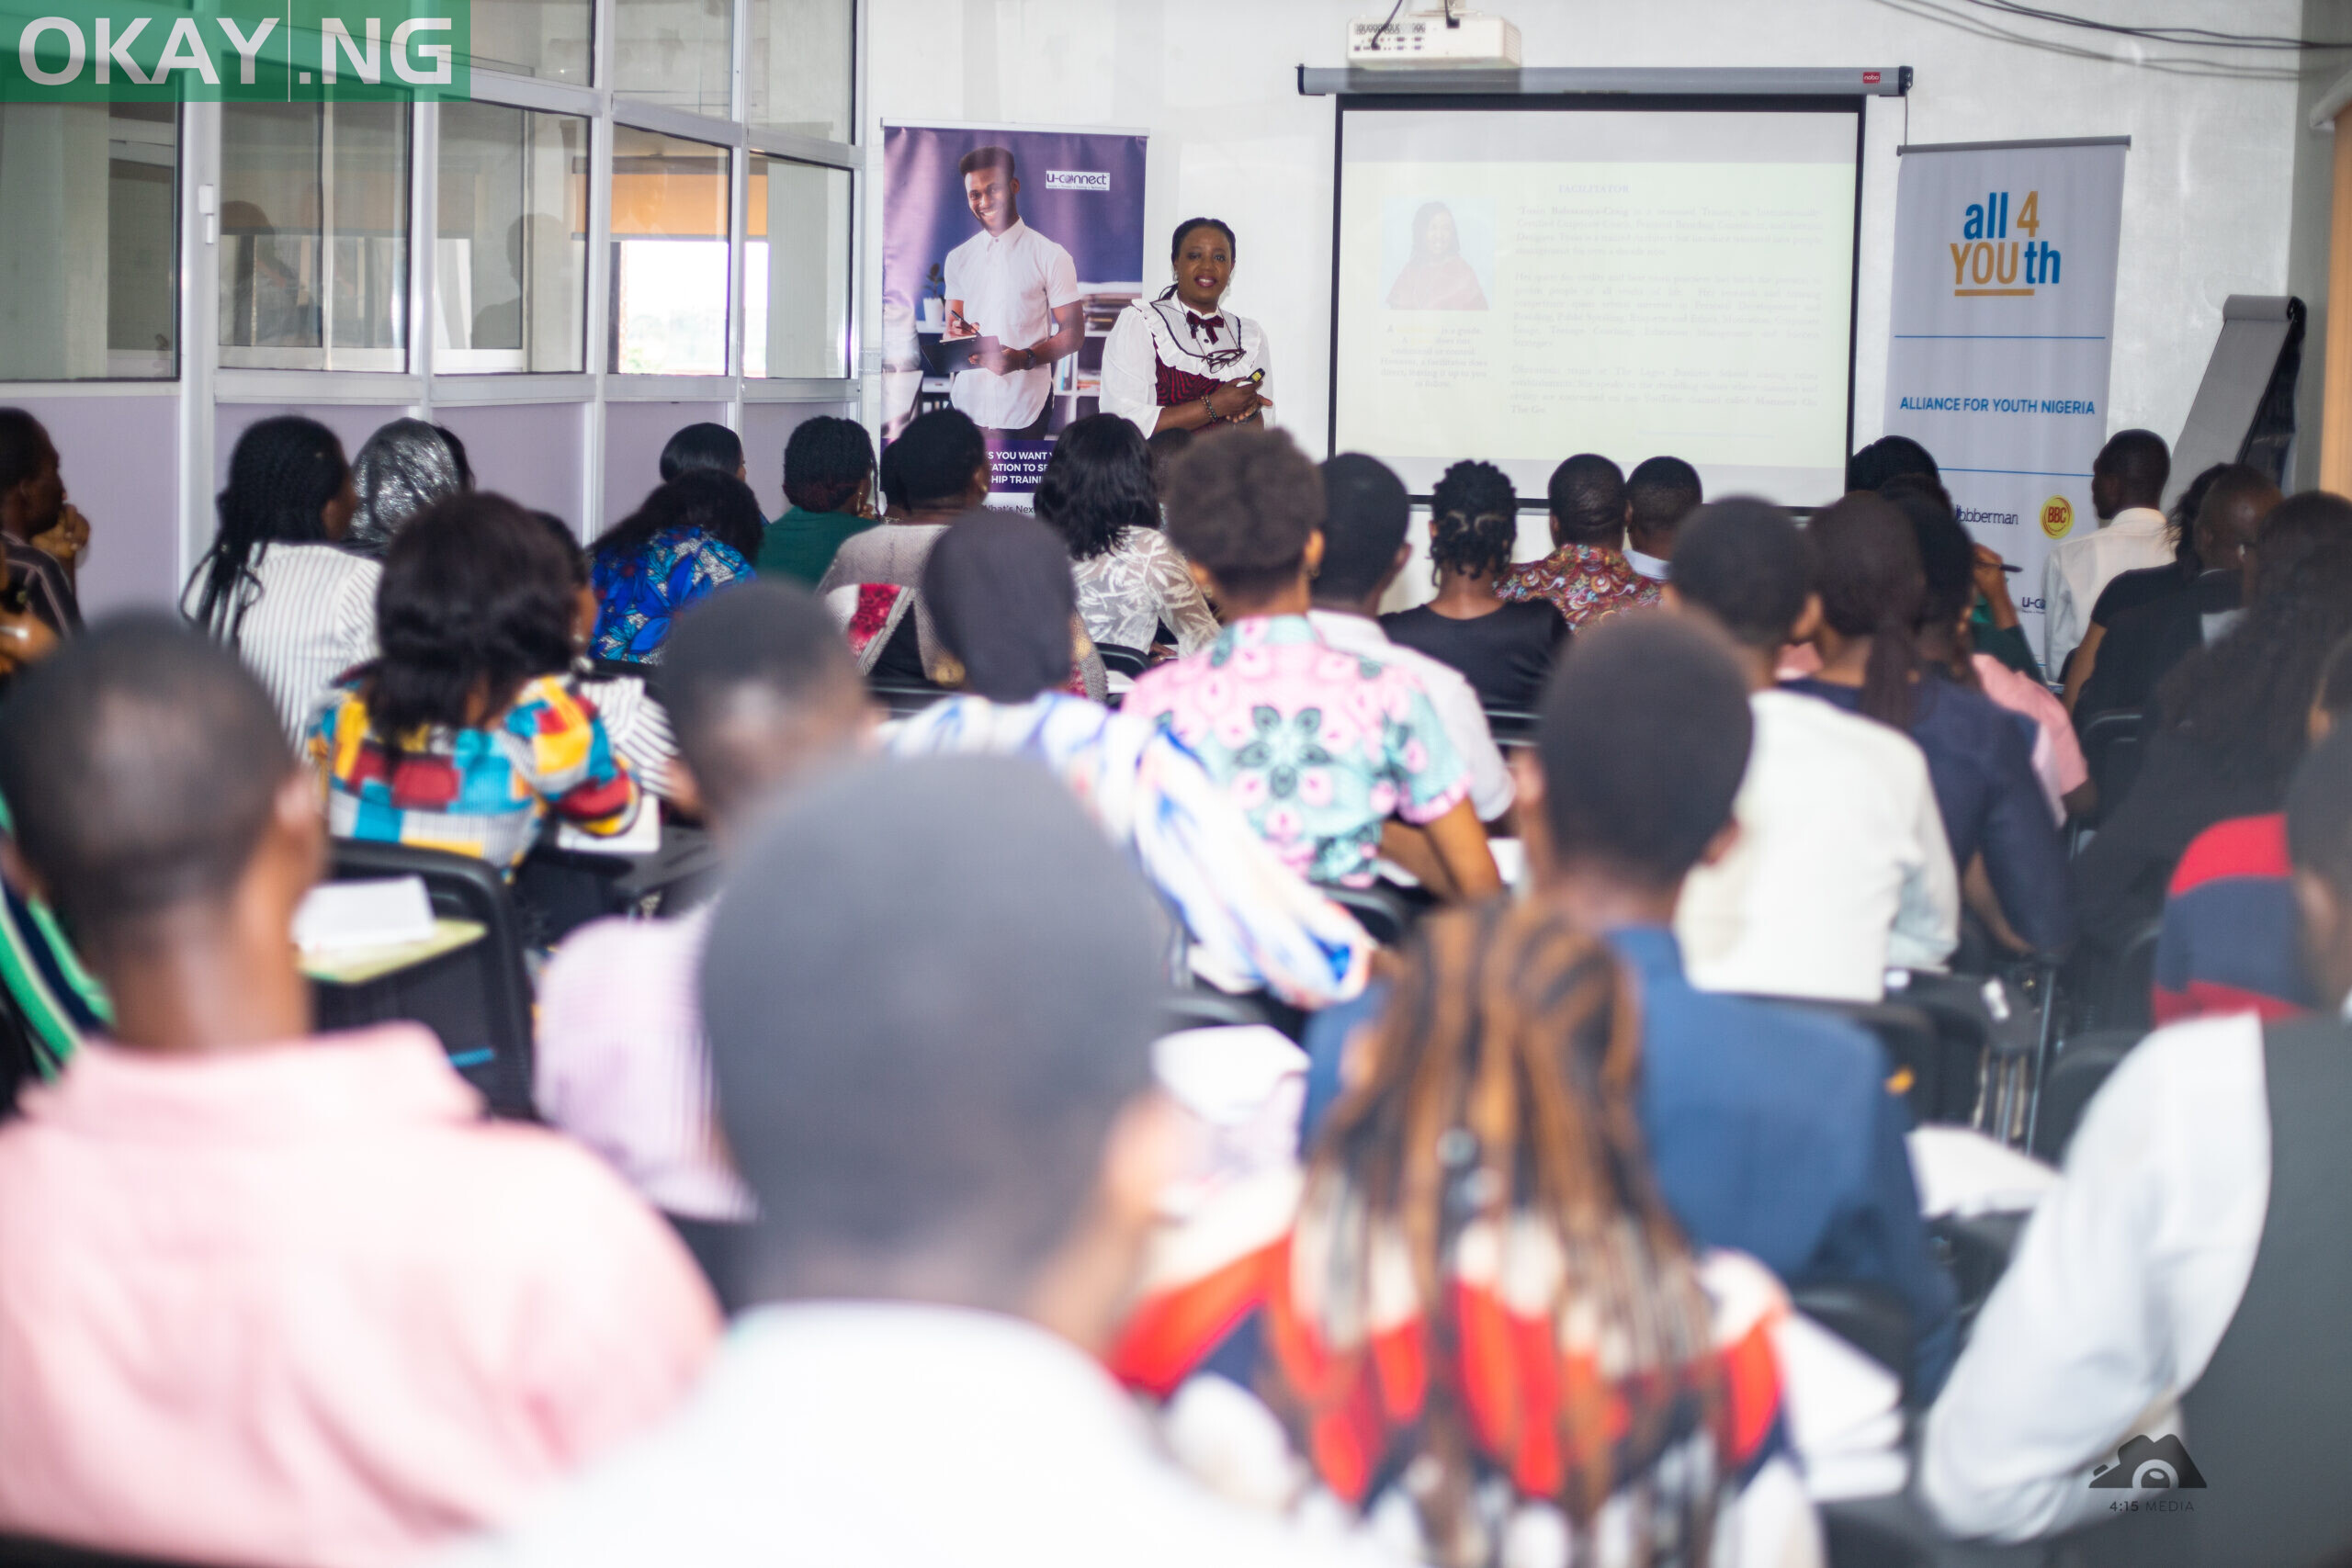 Tosin Babasanya-Craig, Country Manager, Performance Fact Inc. facilitating one of the Alliance for Youth Nigeria sessions to equips youth across the country for employment.